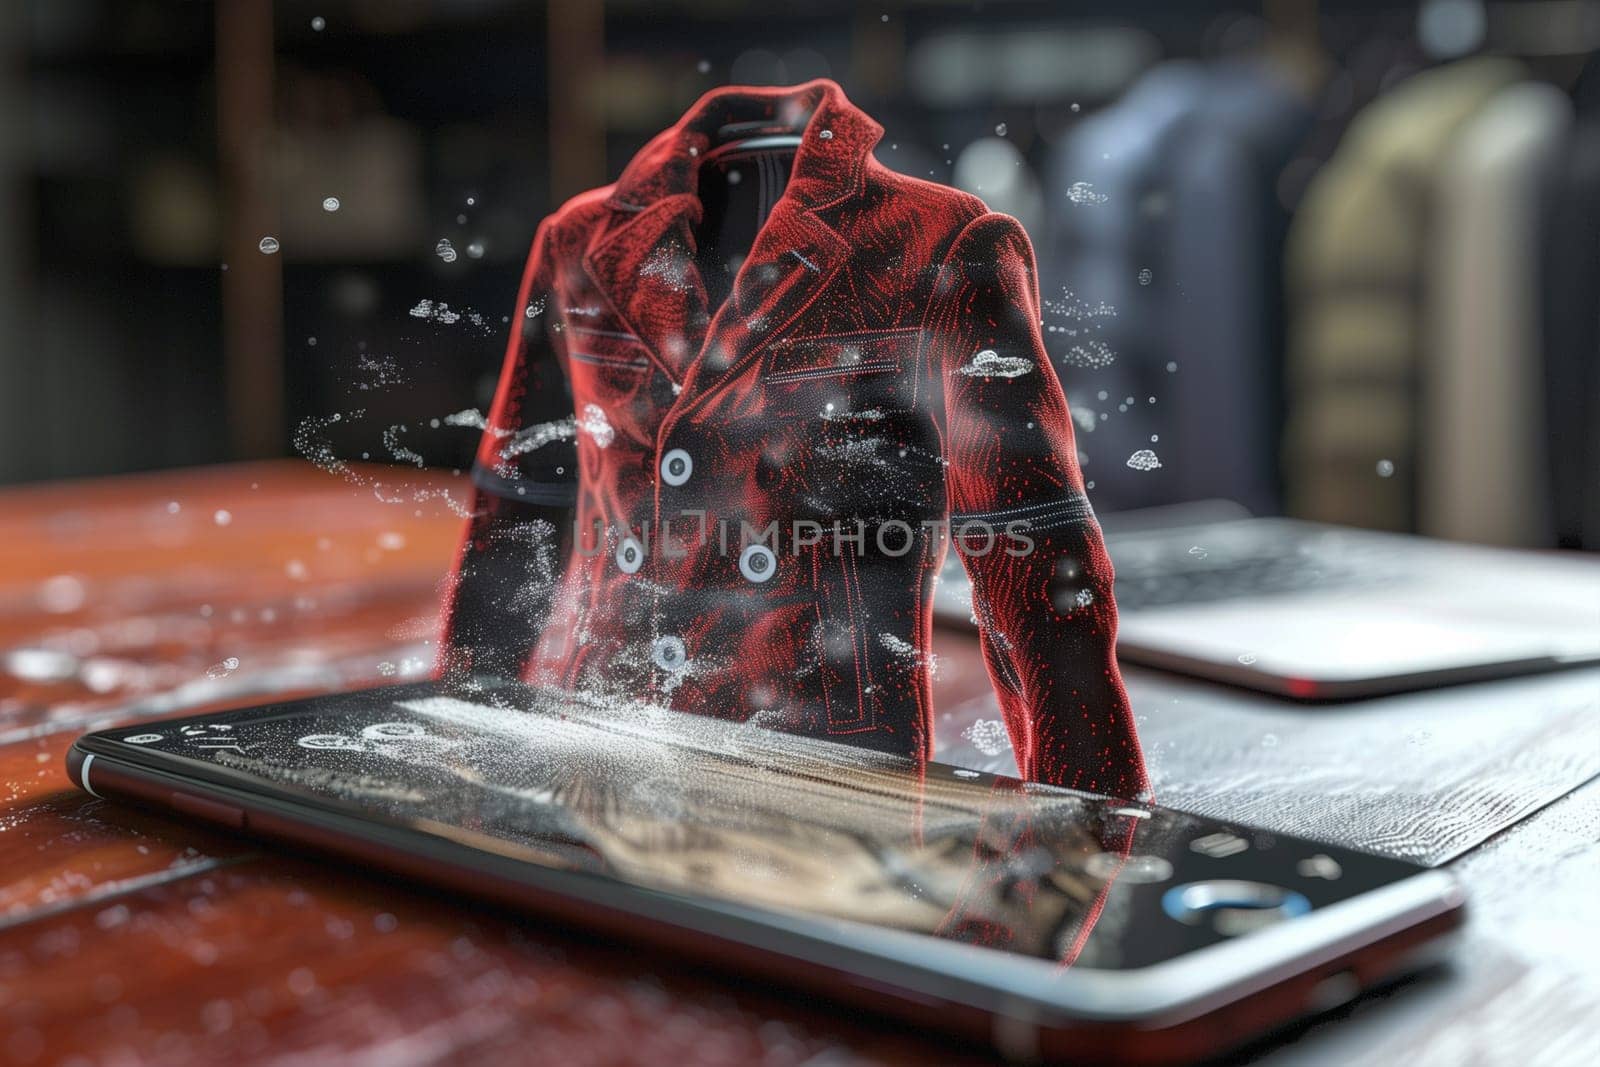 A red jacket lying on top of a tablet device, creating a striking contrast in colors.